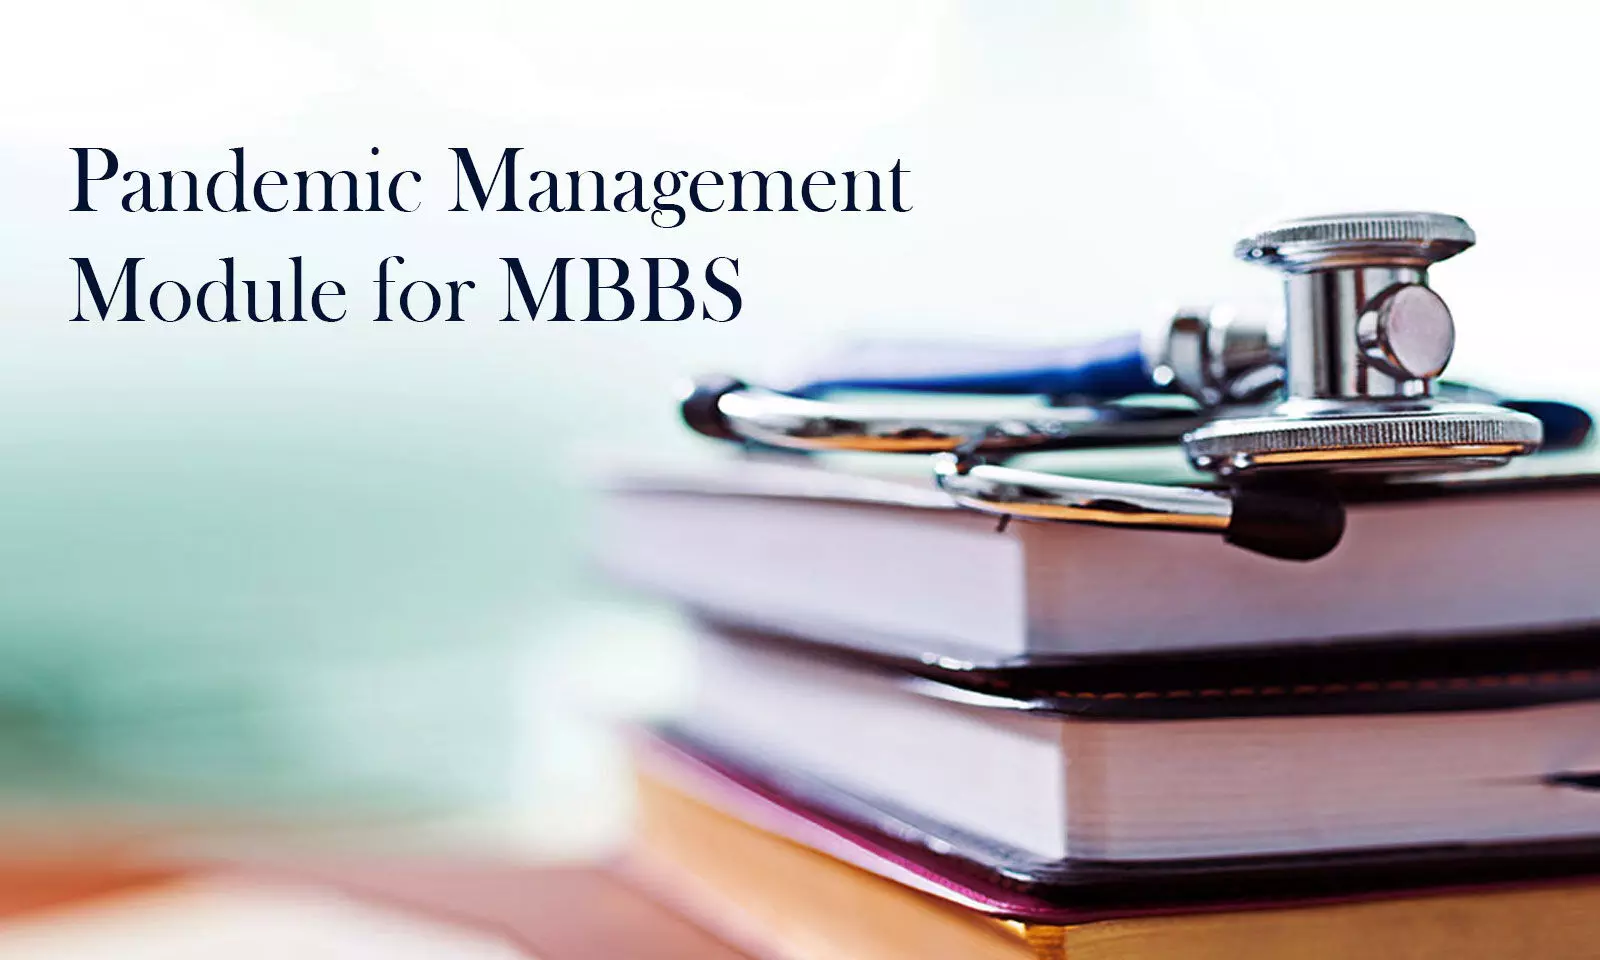 New MBBS Curriculum: MCI releases new Pandemic Management Module for medical students